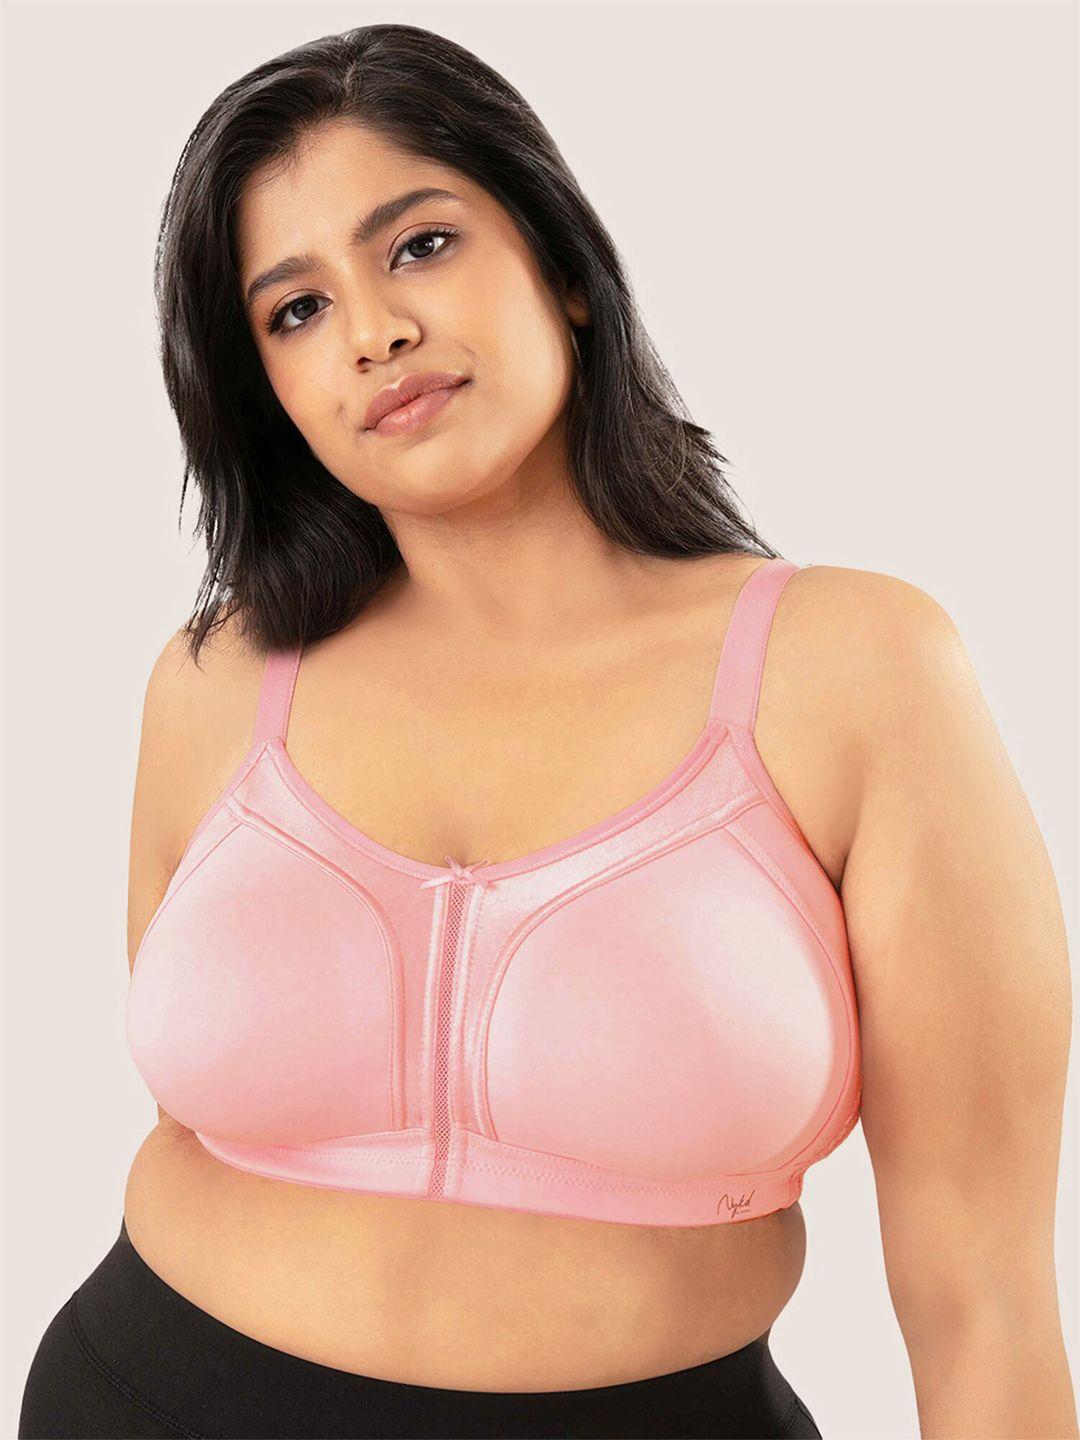 nykd-plus-size-heavy-bust-seamless-cotton-bra---non-wired-non-padded-full-coverage